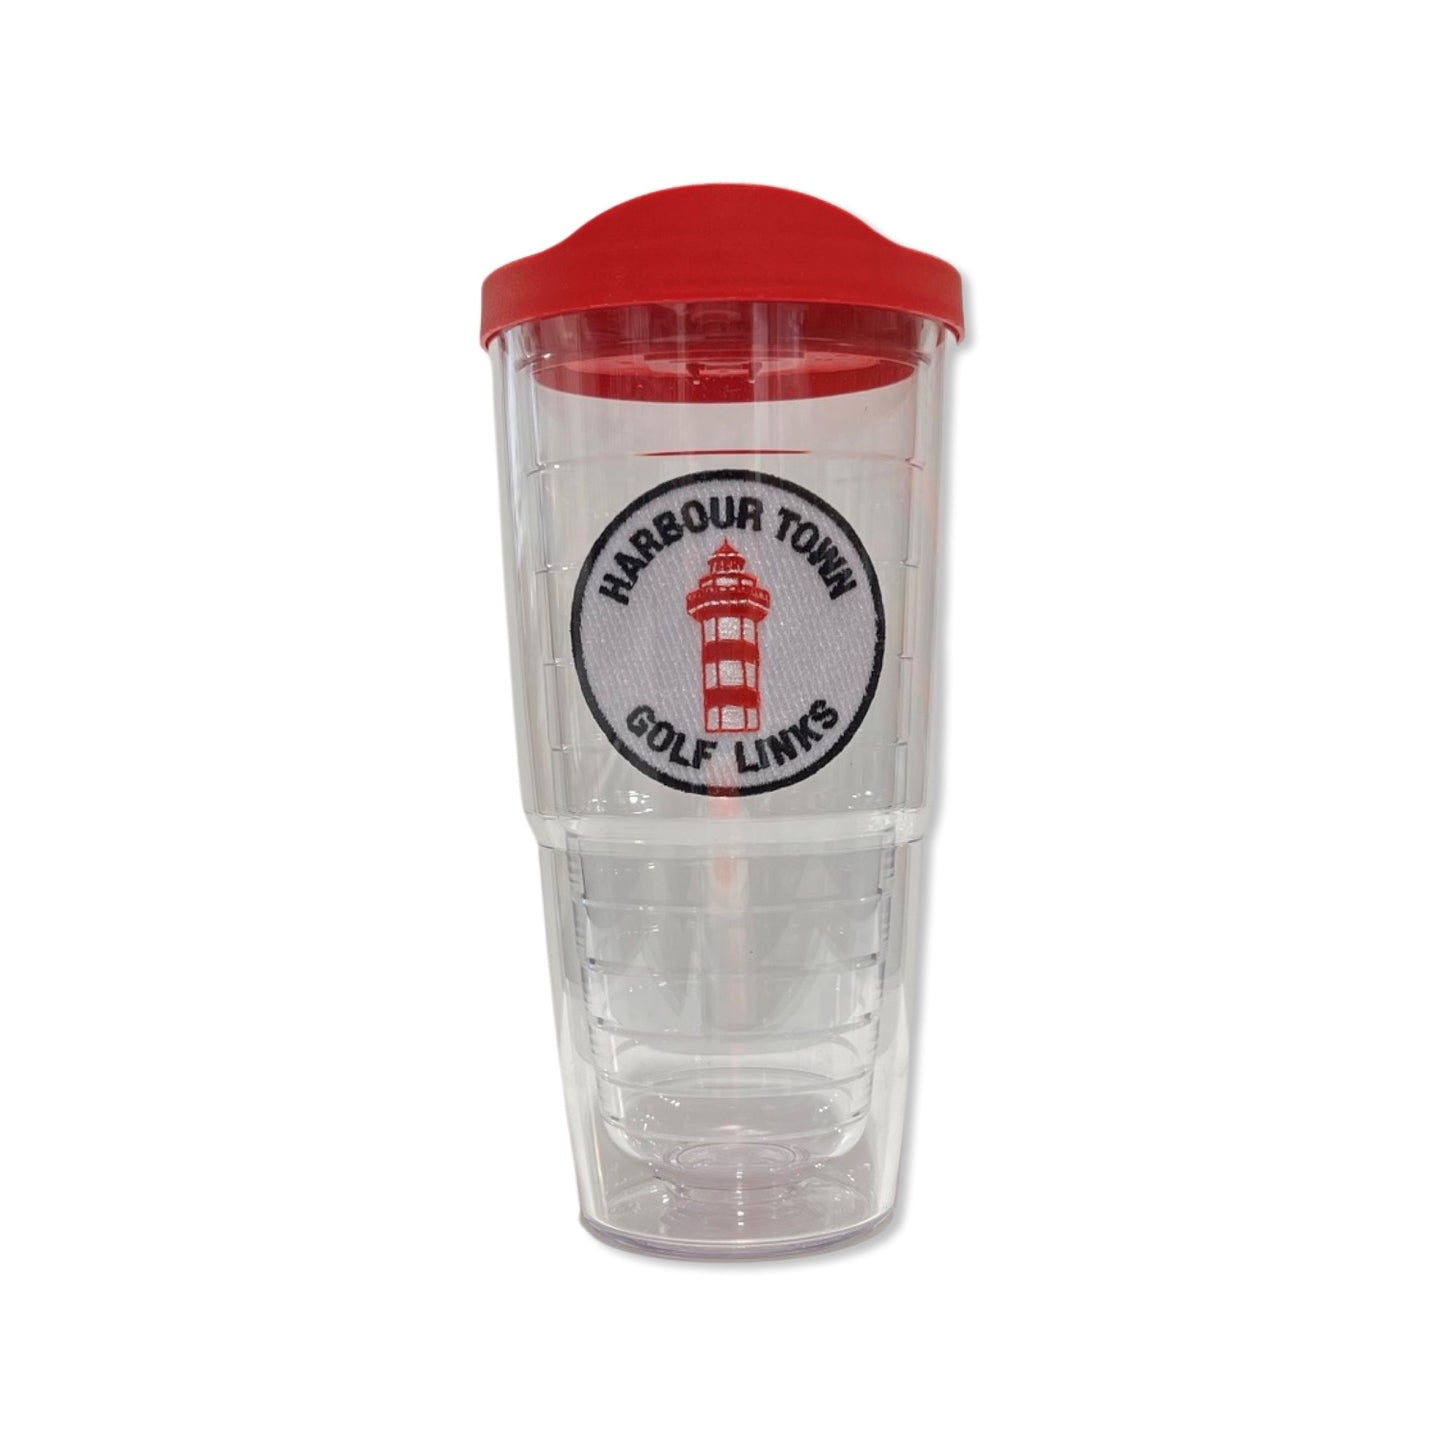 Tervis Tumbler Harbour Town Golf Links 24oz - 2 Pack